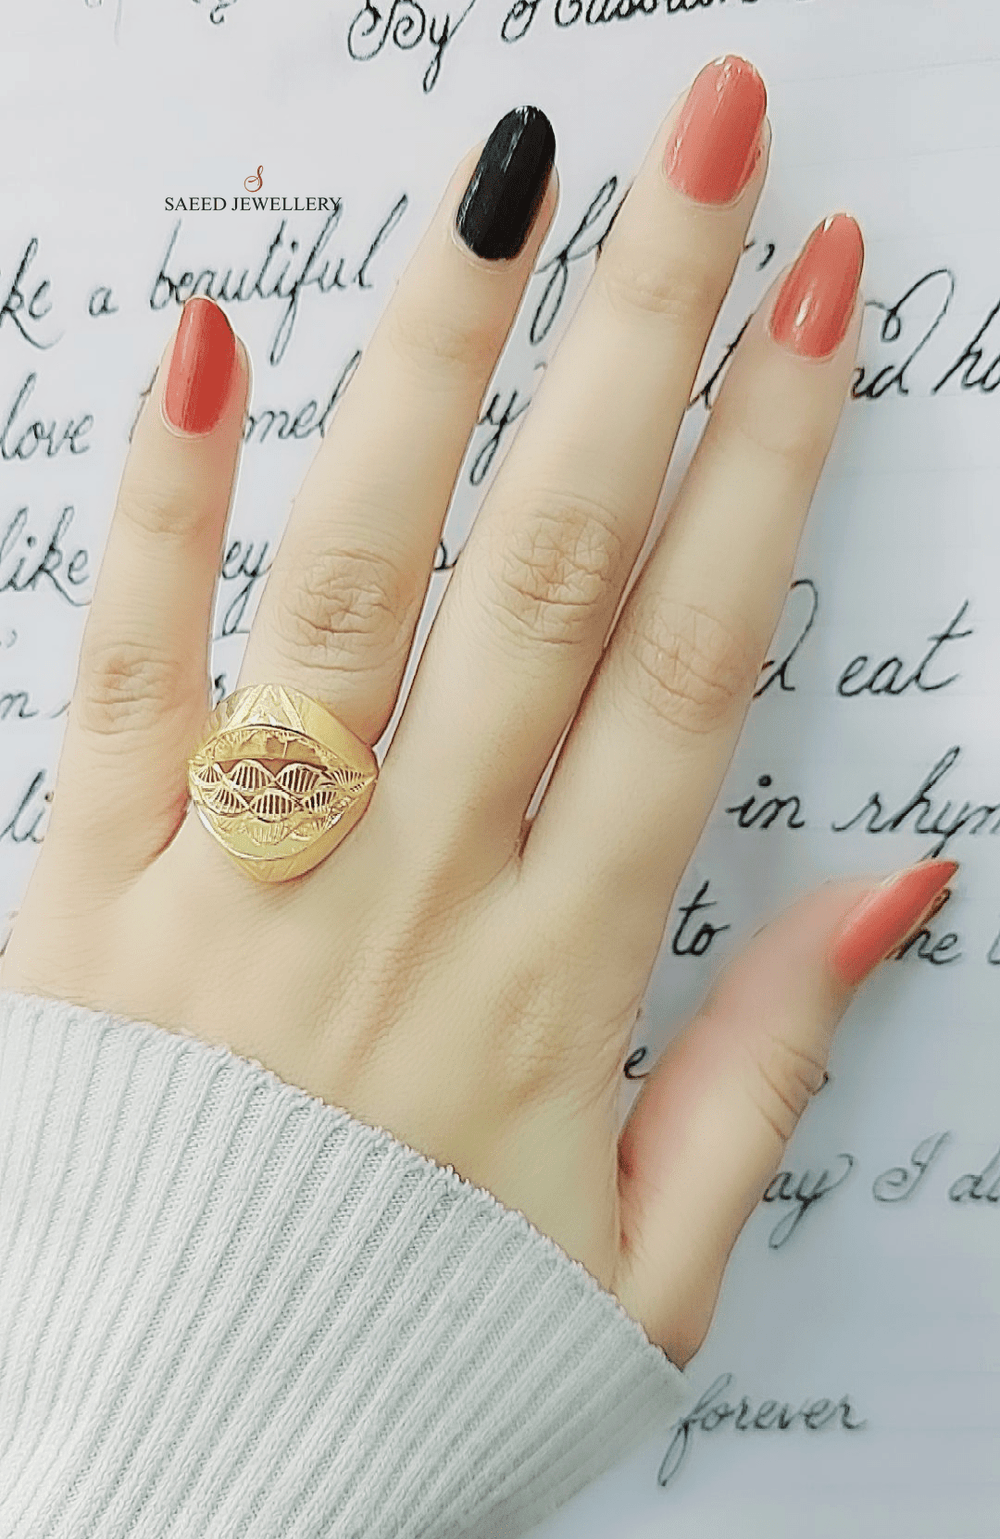 21K Fancy Ring Made of 21K Yellow Gold by Saeed Jewelry-24589